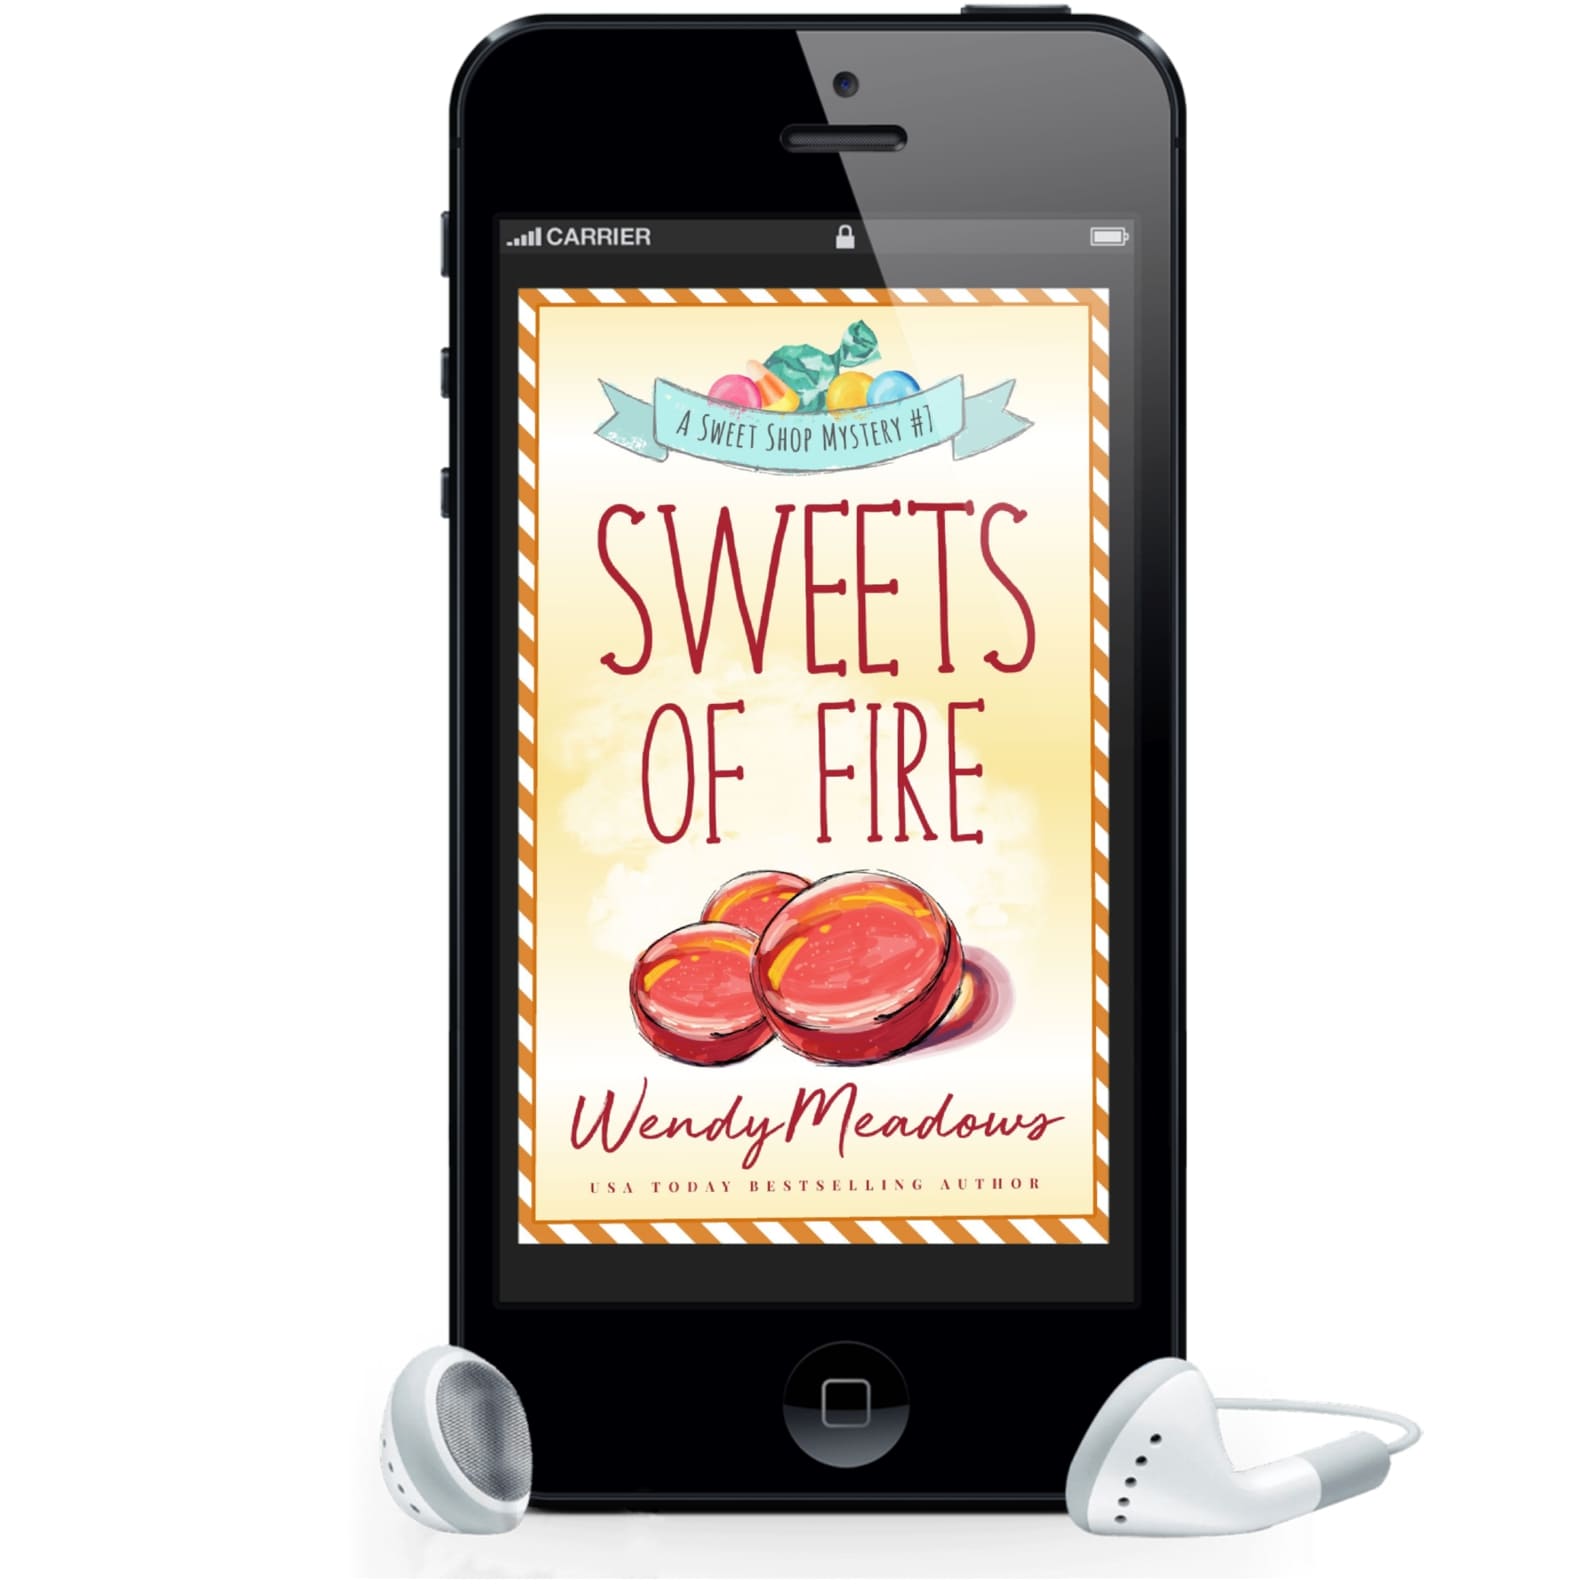 Wendy Meadows Cozy Mystery Sweets of Fire (AUDIOBOOK)